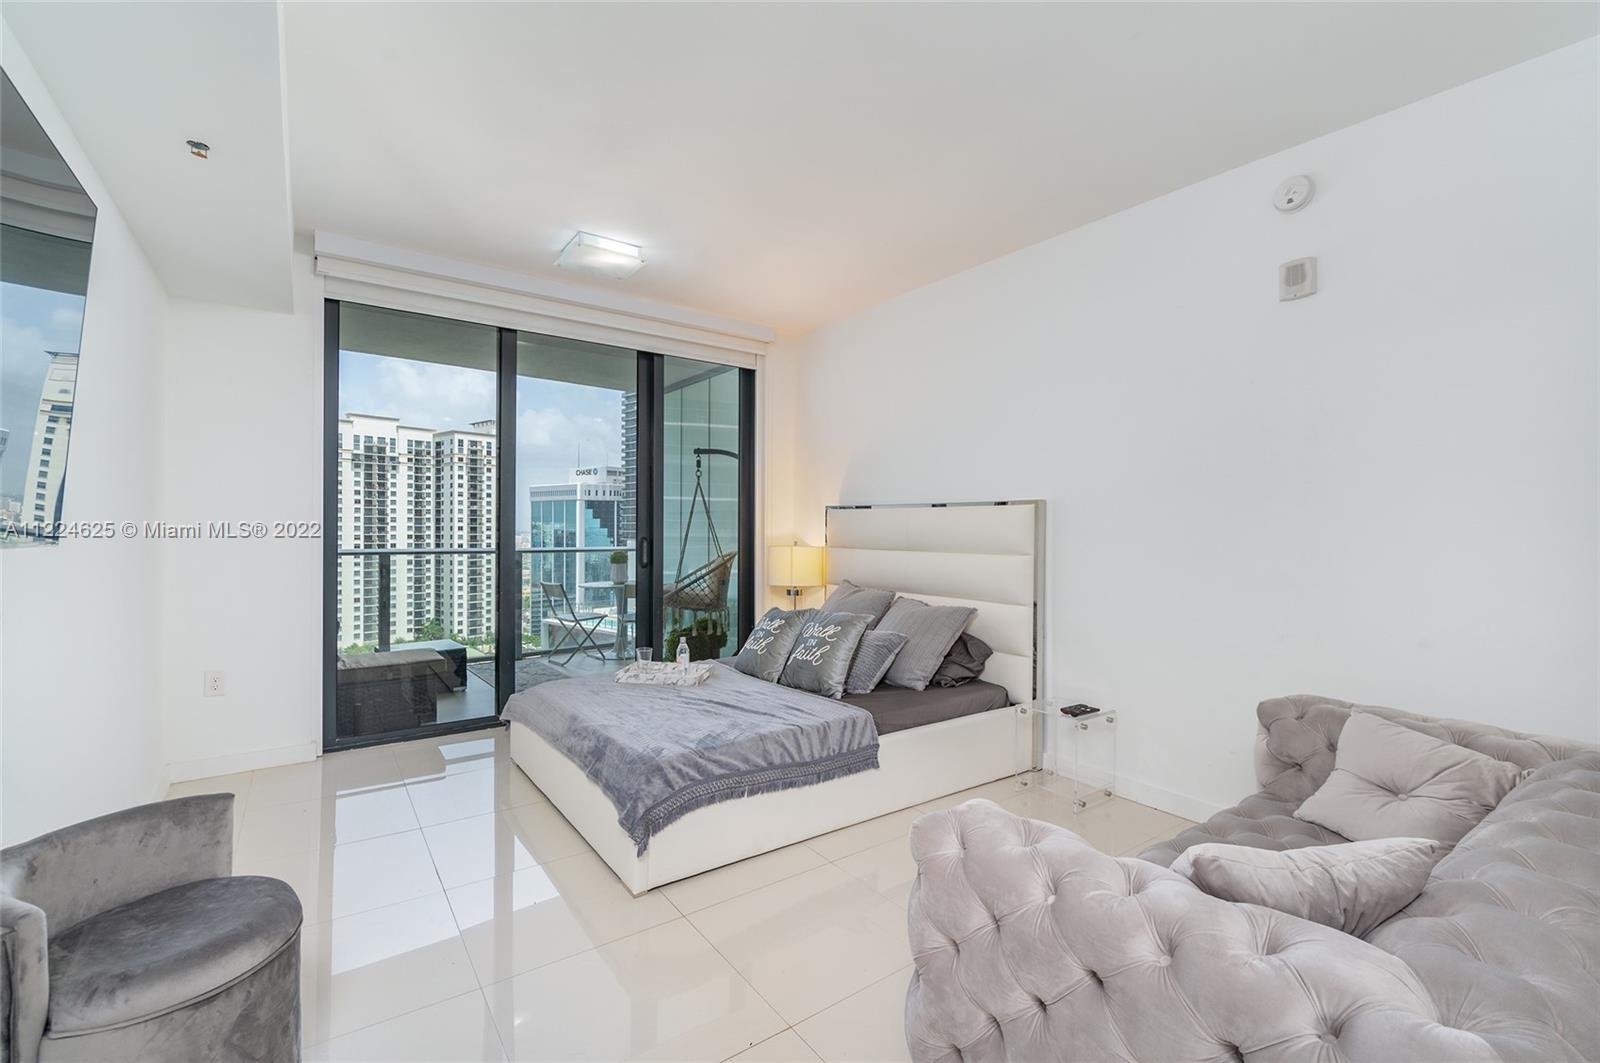 Stunning studio in 1010 Brickell Ave with incredible view of the city. Amenities include spa, fitnes